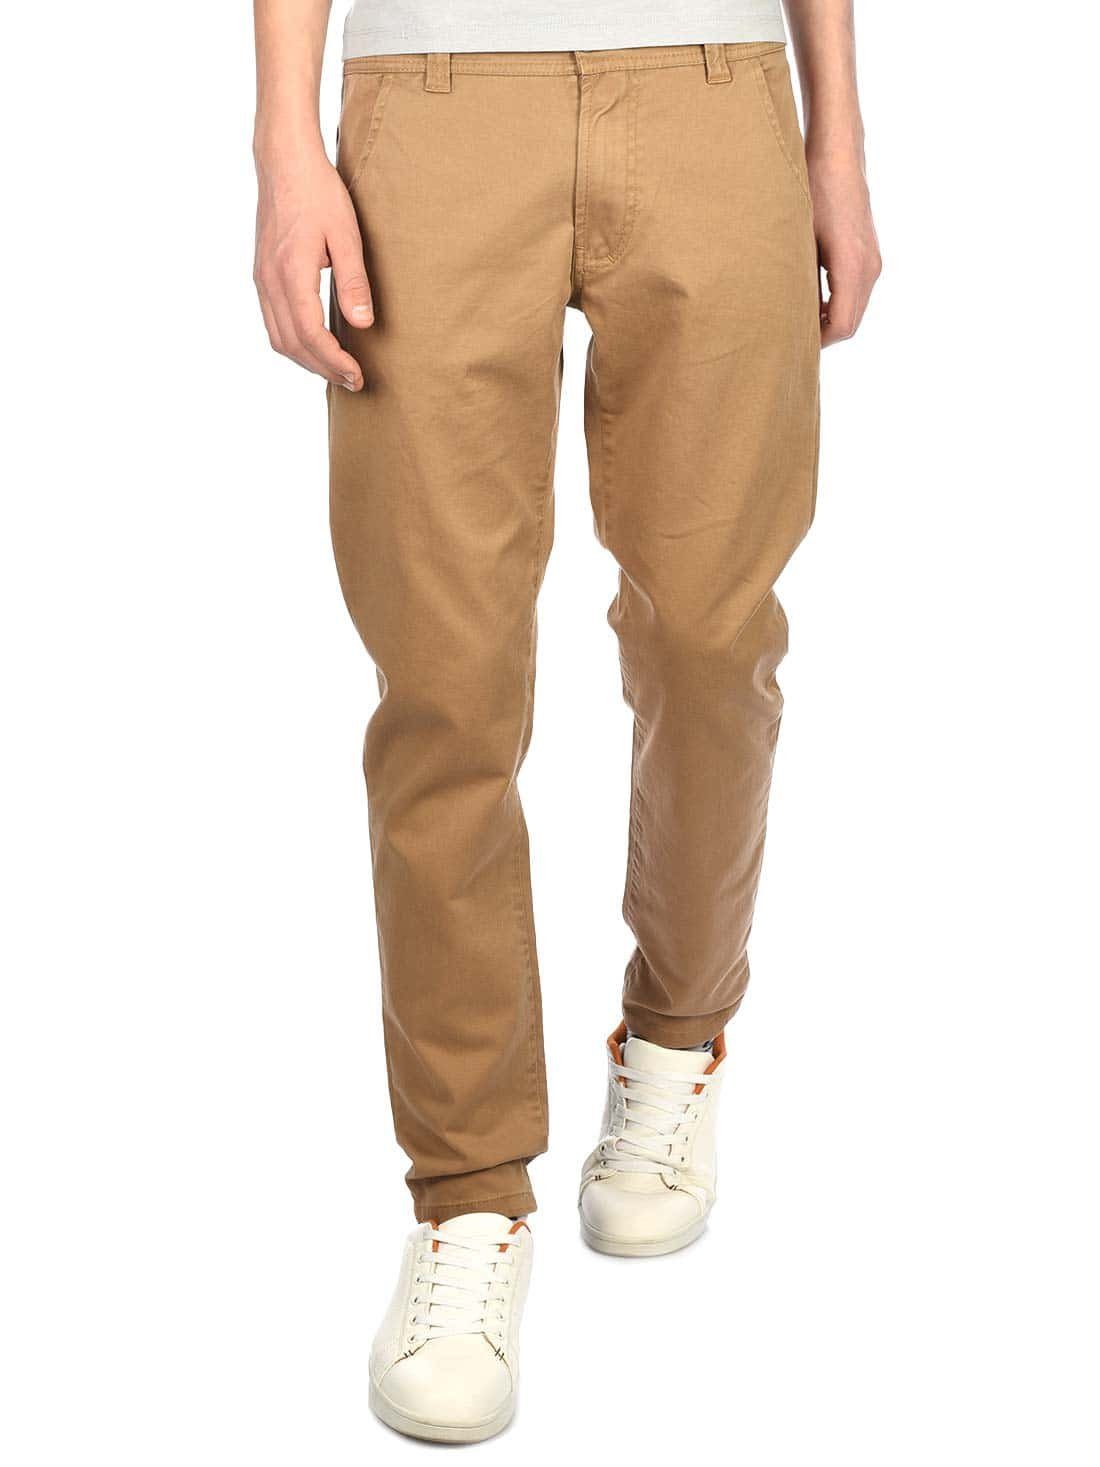 (1-tlg) Beige Chinohose Jungen BEZLIT Hose Chino casual